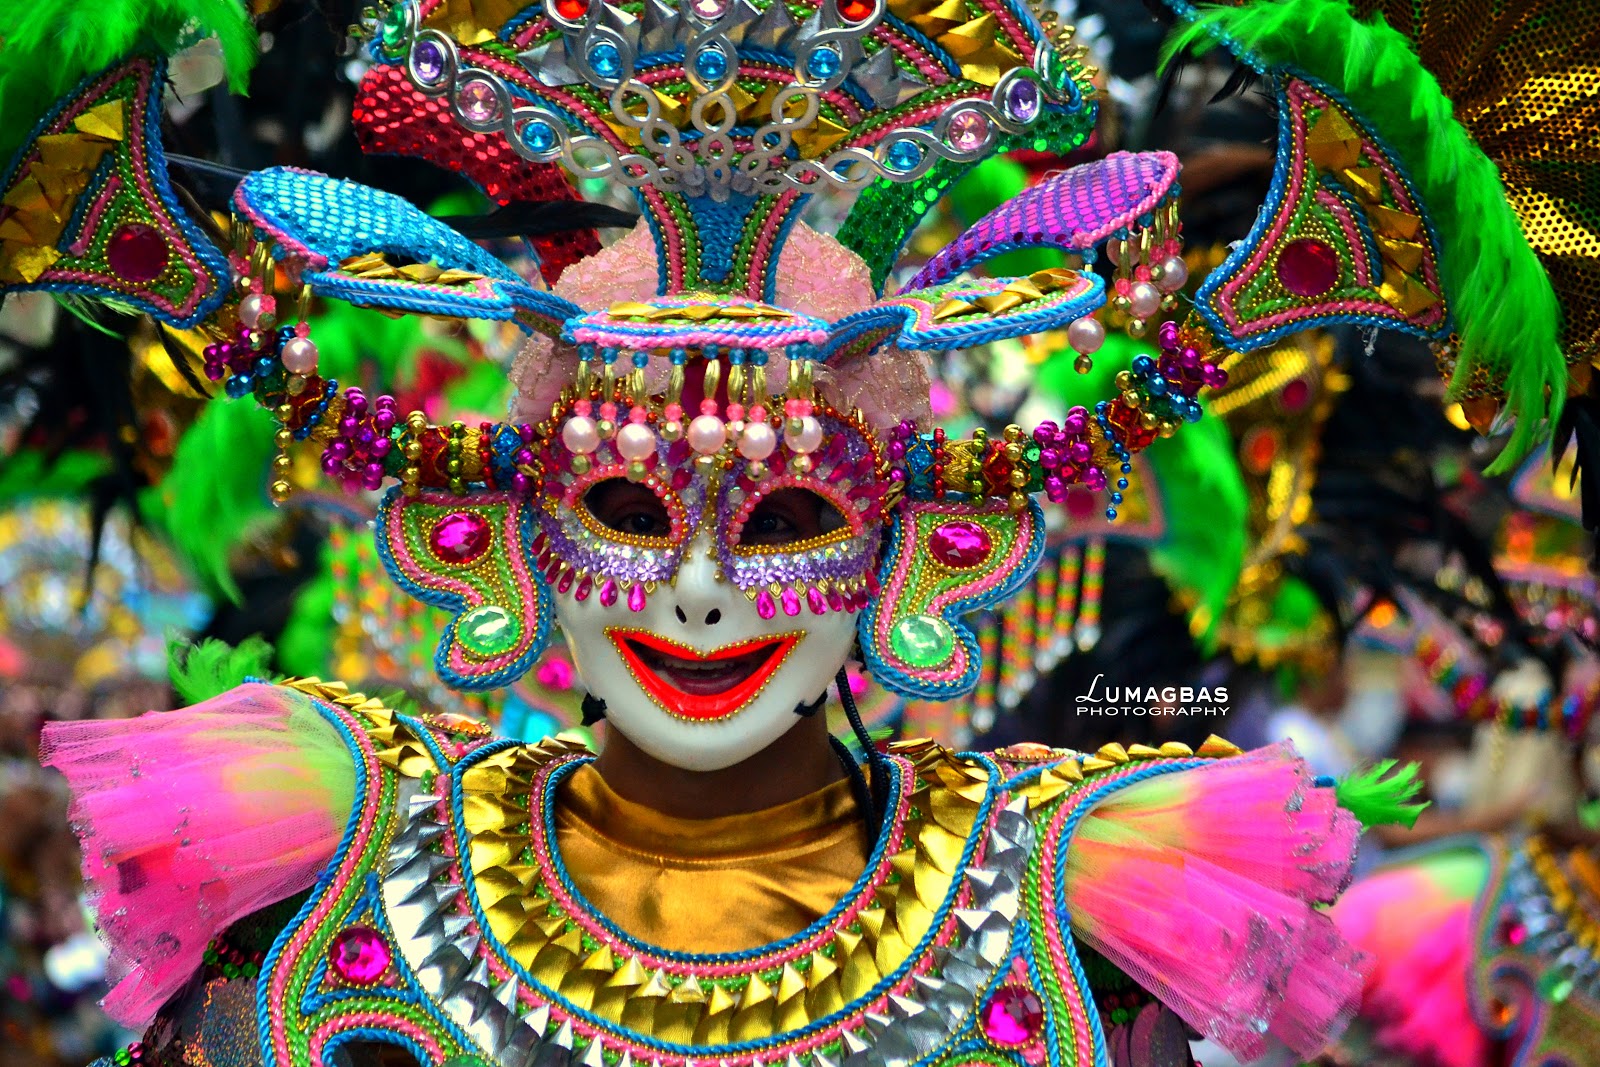  A colorful and intricate mask, adorned with beads, sequins, and feathers, is worn by a dancer during a traditional dance performance.